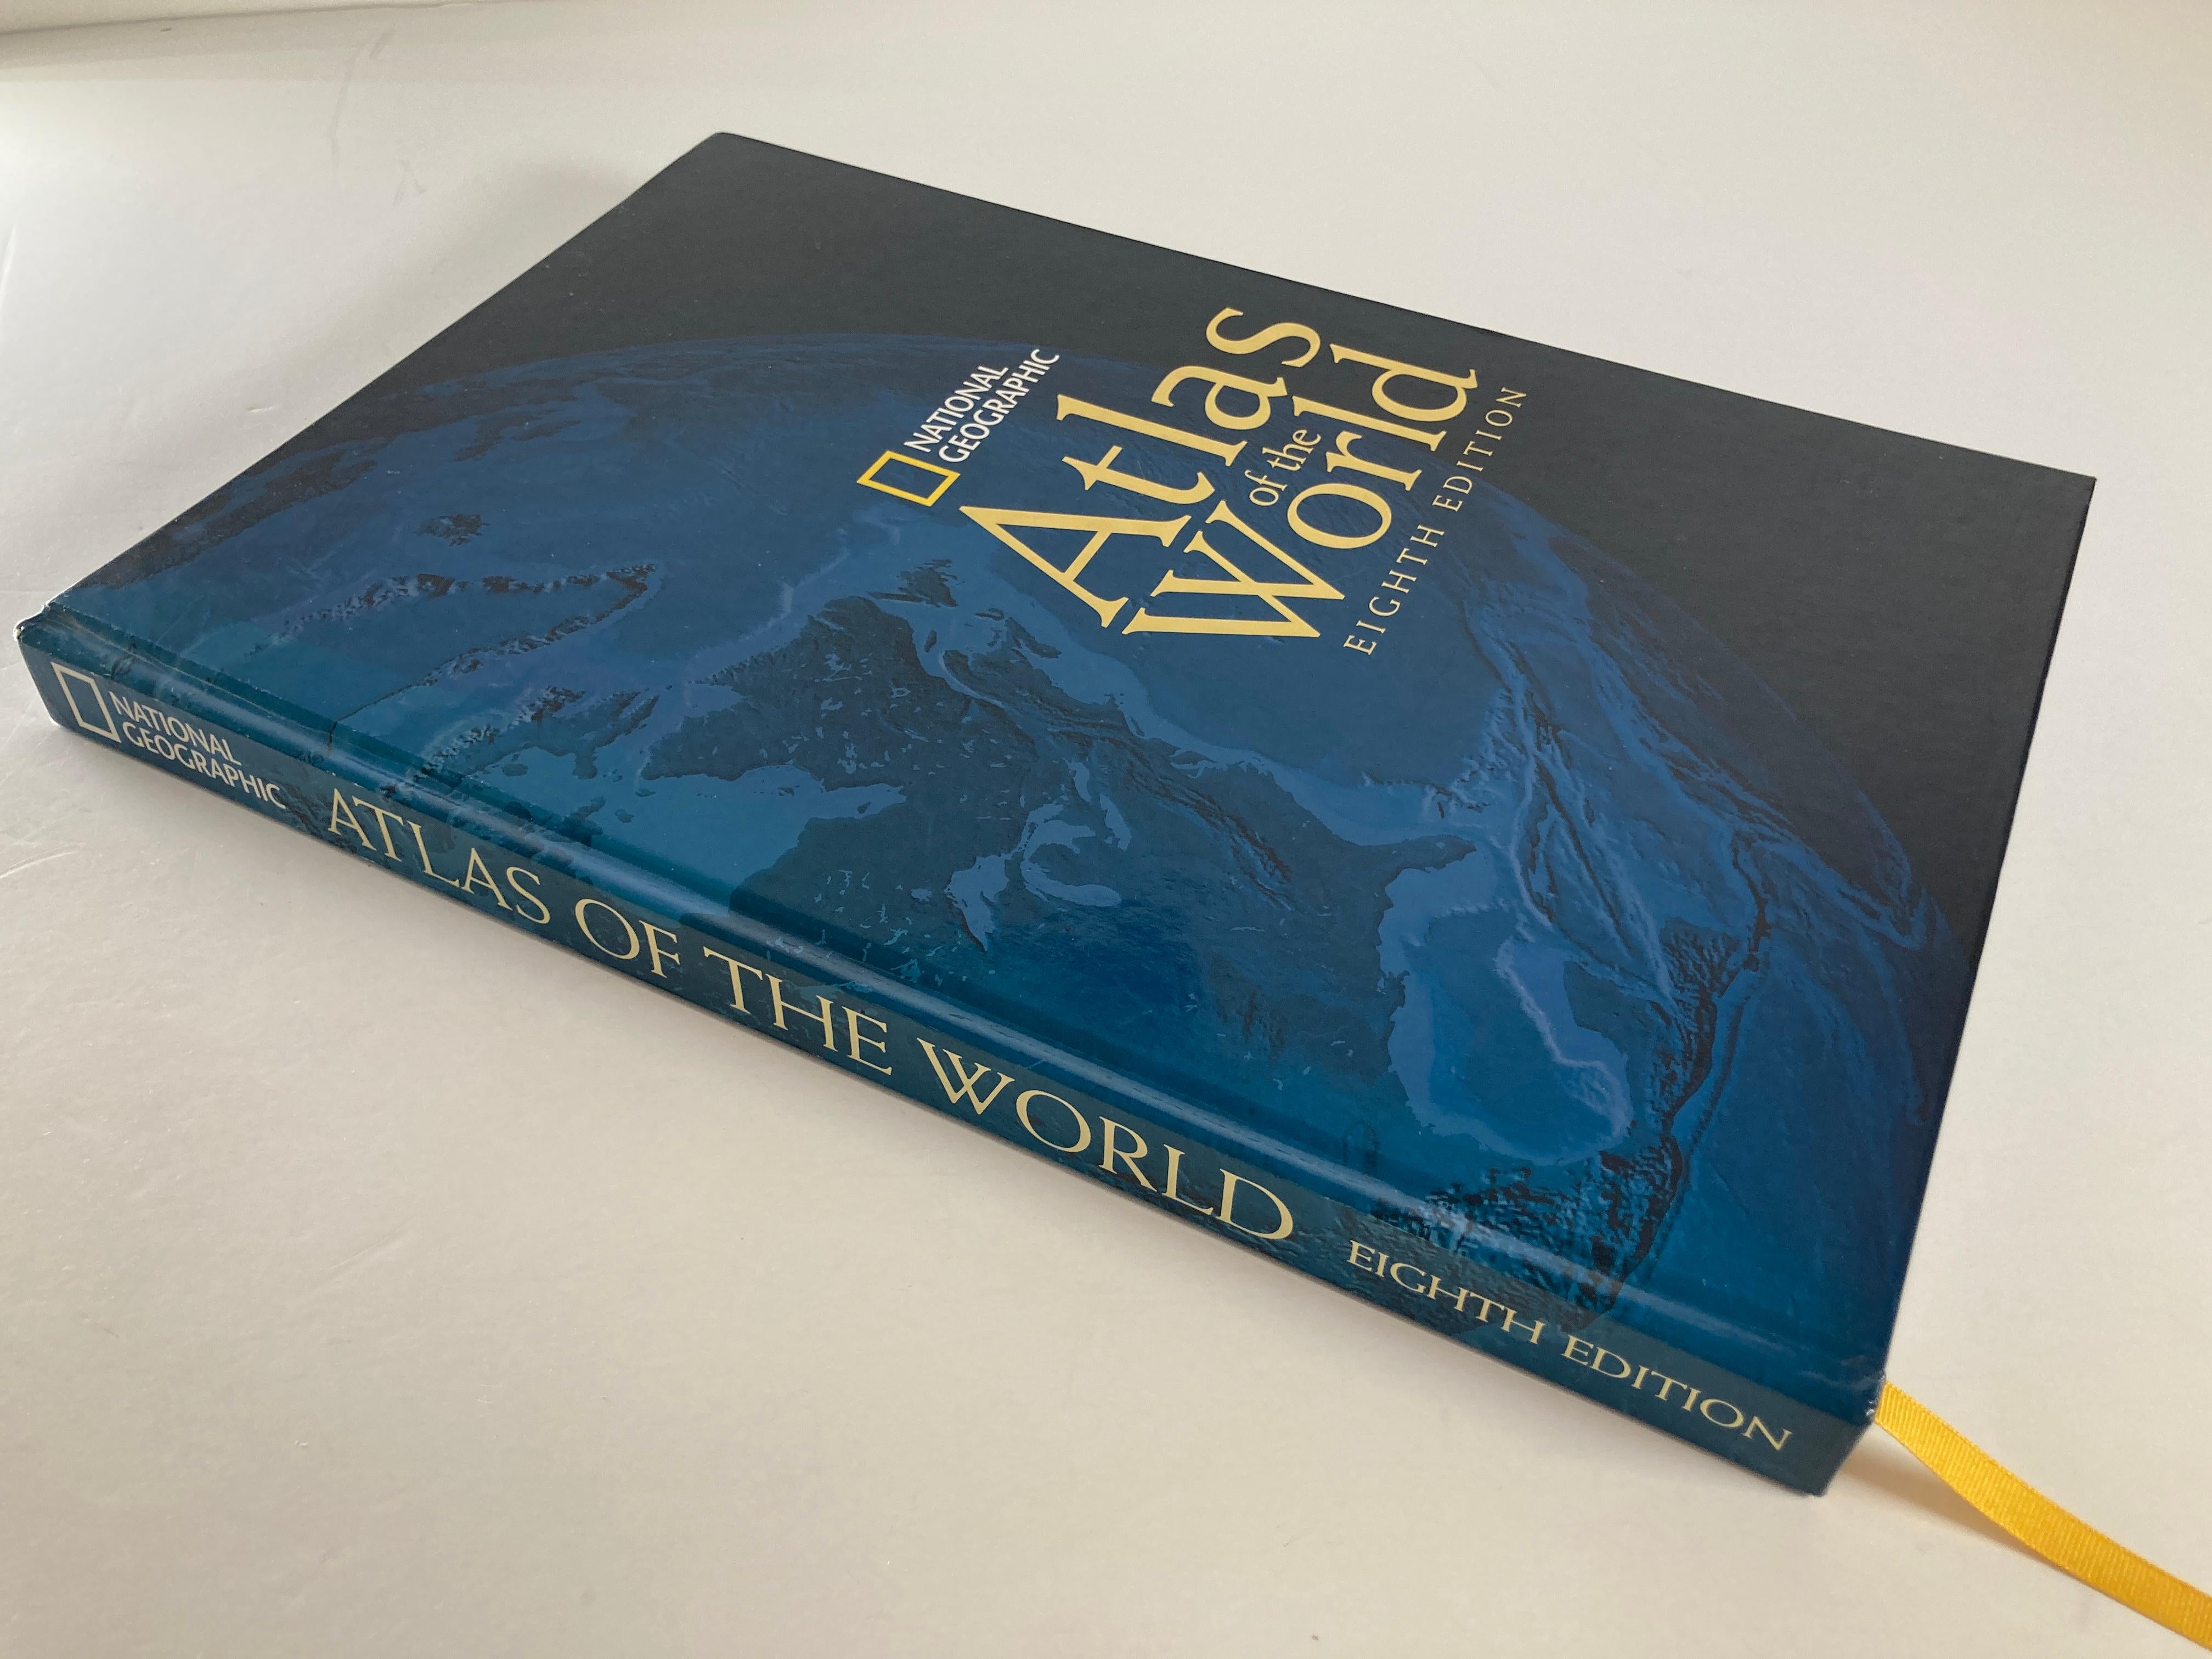 National Geographic Atlas of the World, Eighth Edition Hardcover Book For Sale 5